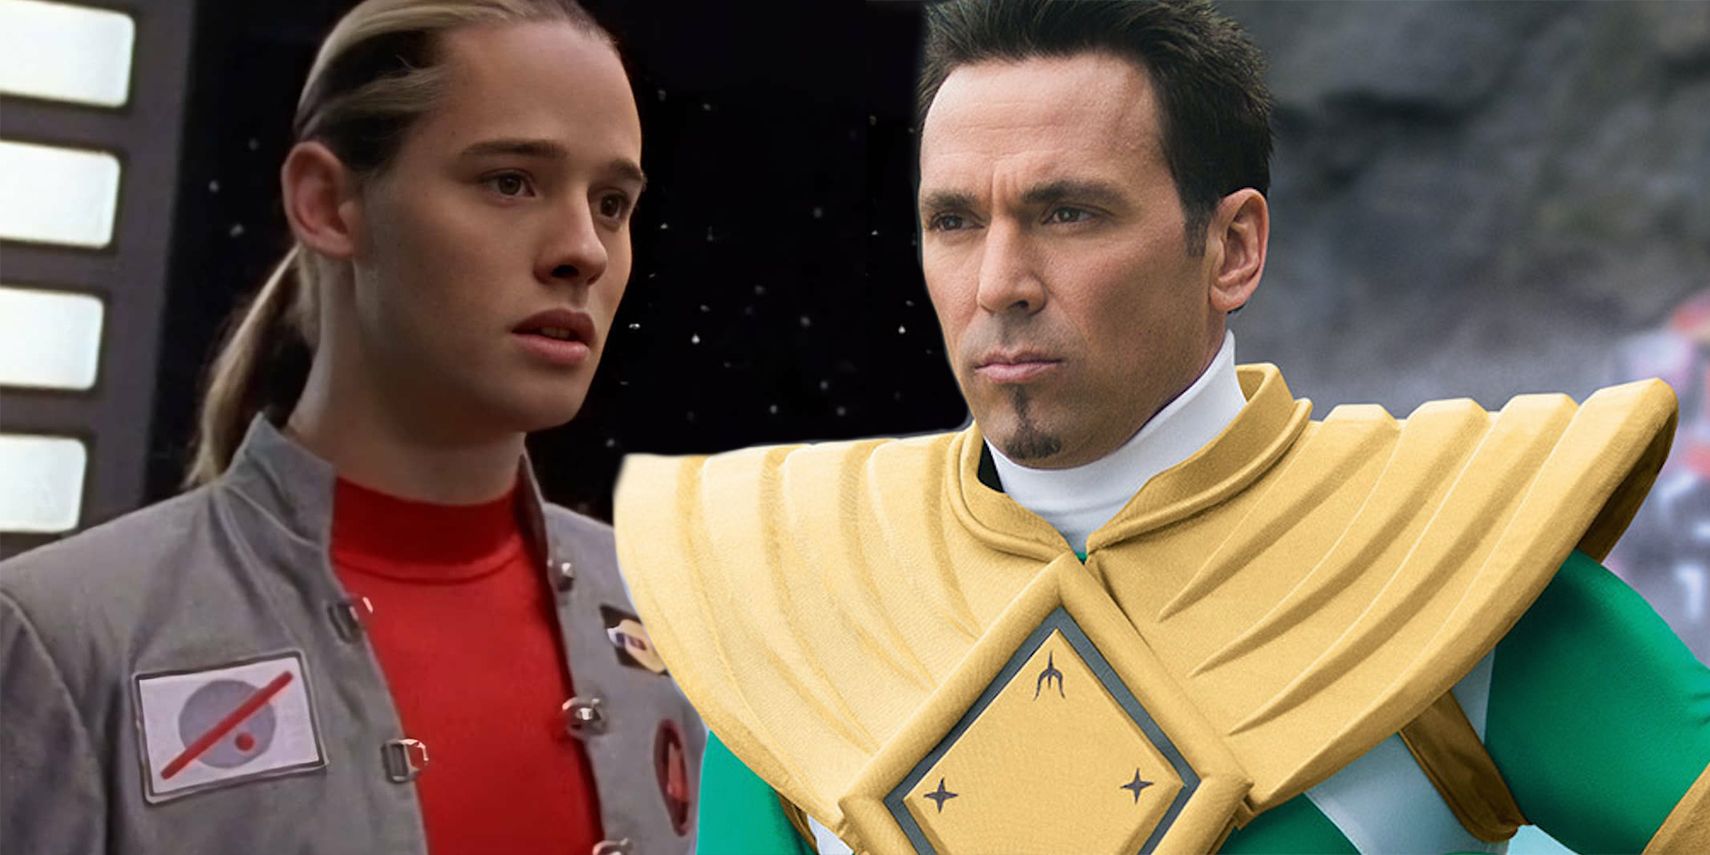 A blended image features Red Ranger Andros and Green Ranger Tommy from the Power Rangers franchise